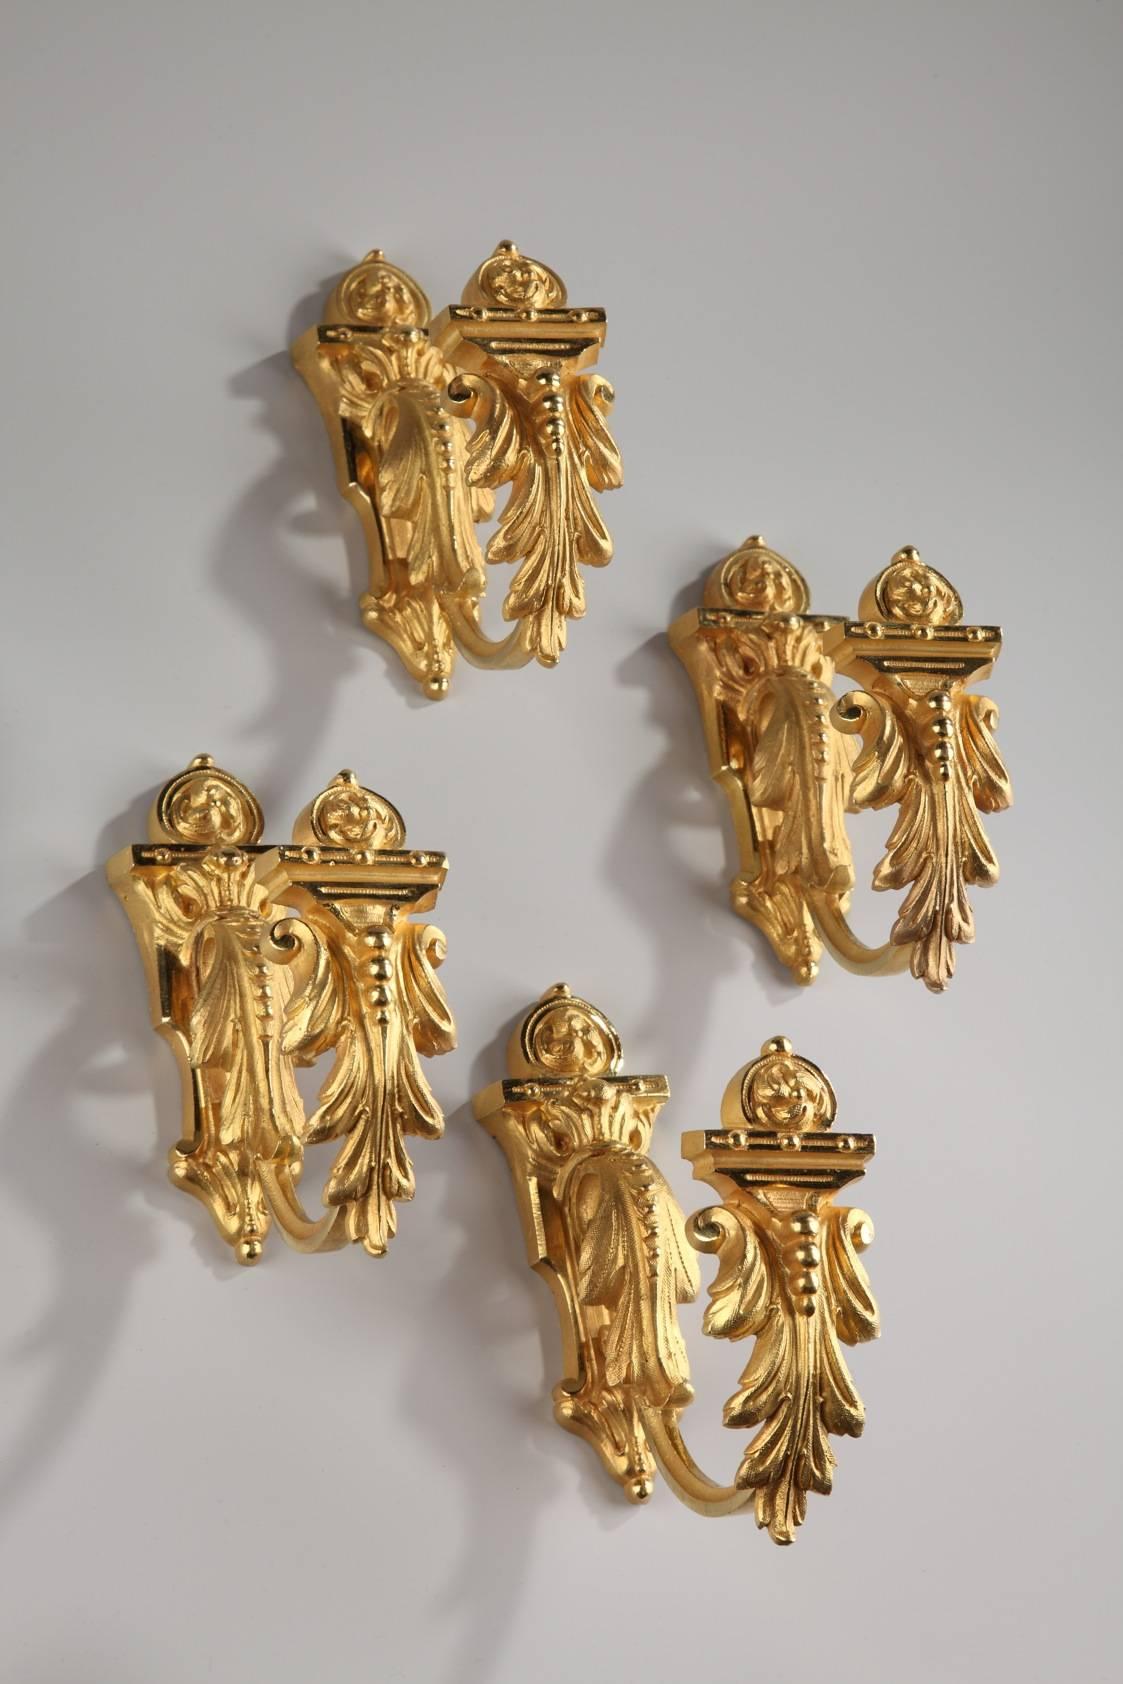 Napoleon III set of four tie-backs in gilt and sculpted bronze decorated with capitals elaborated with acanthus leaves and topped by small flowers. All four are marked: 